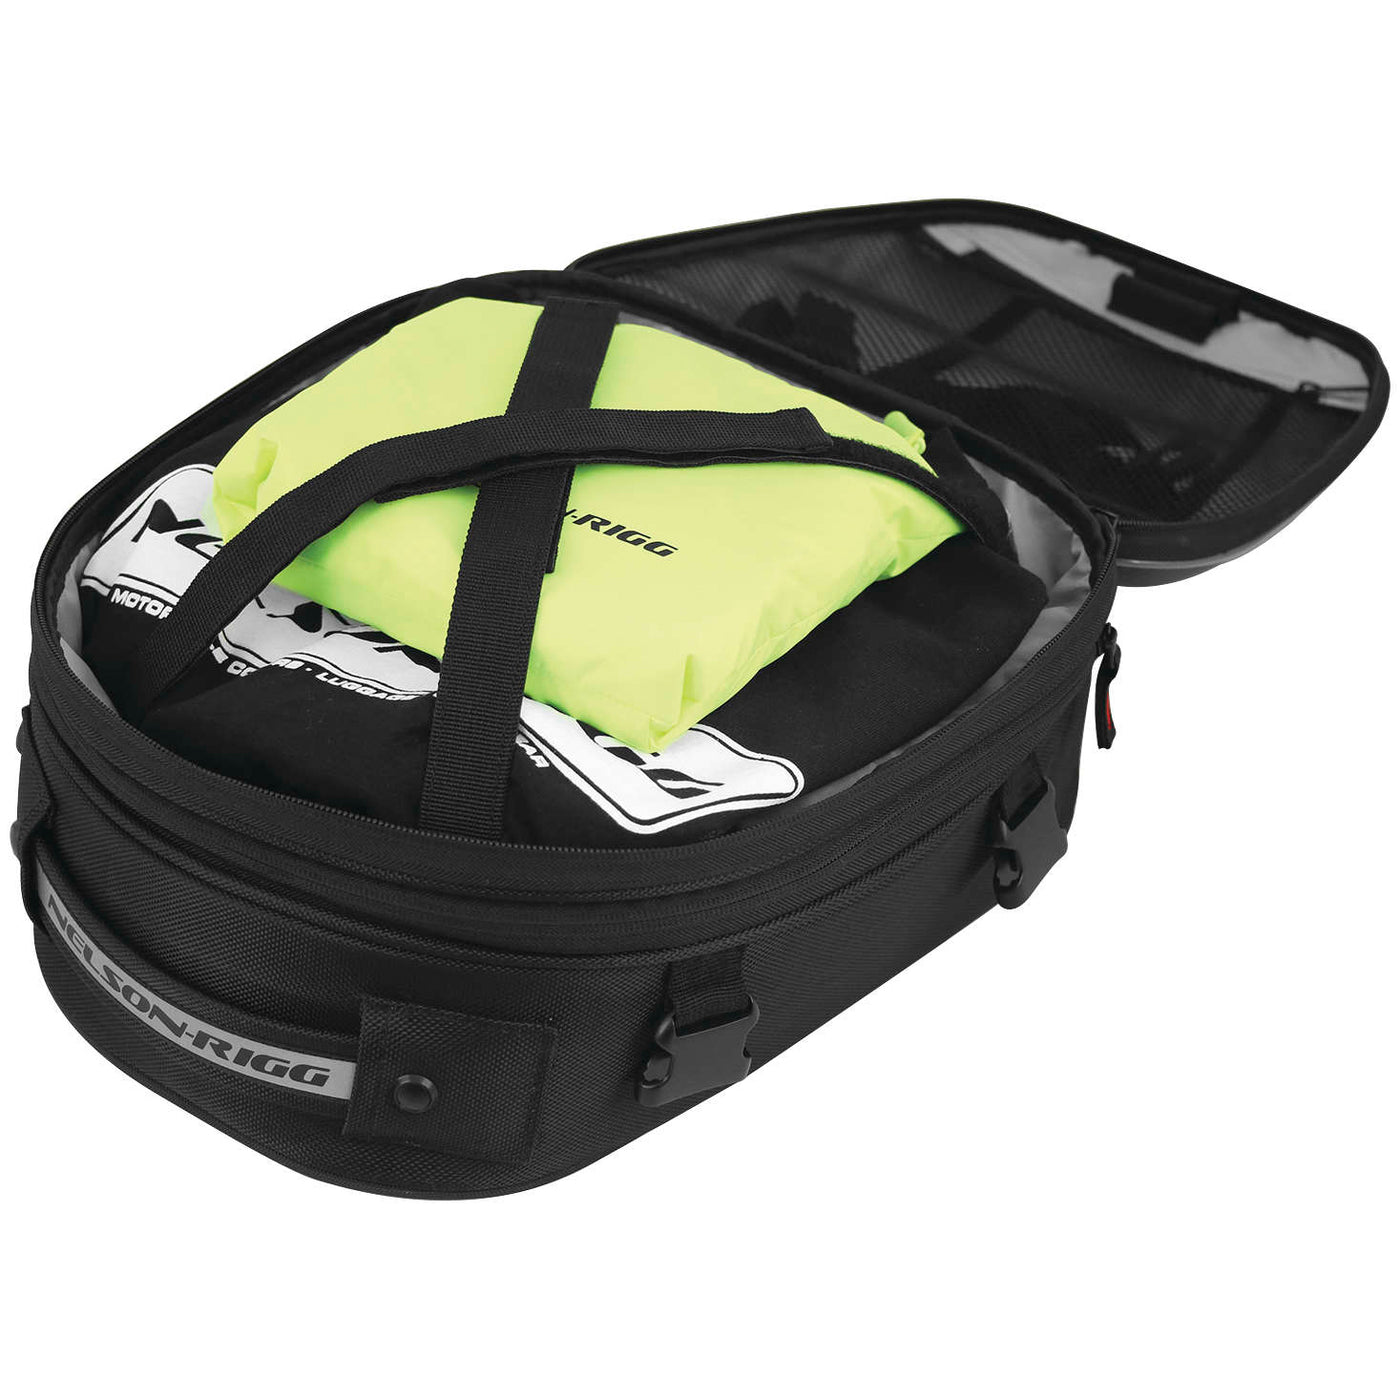 Nelson-Rigg Commuter Tail Bags